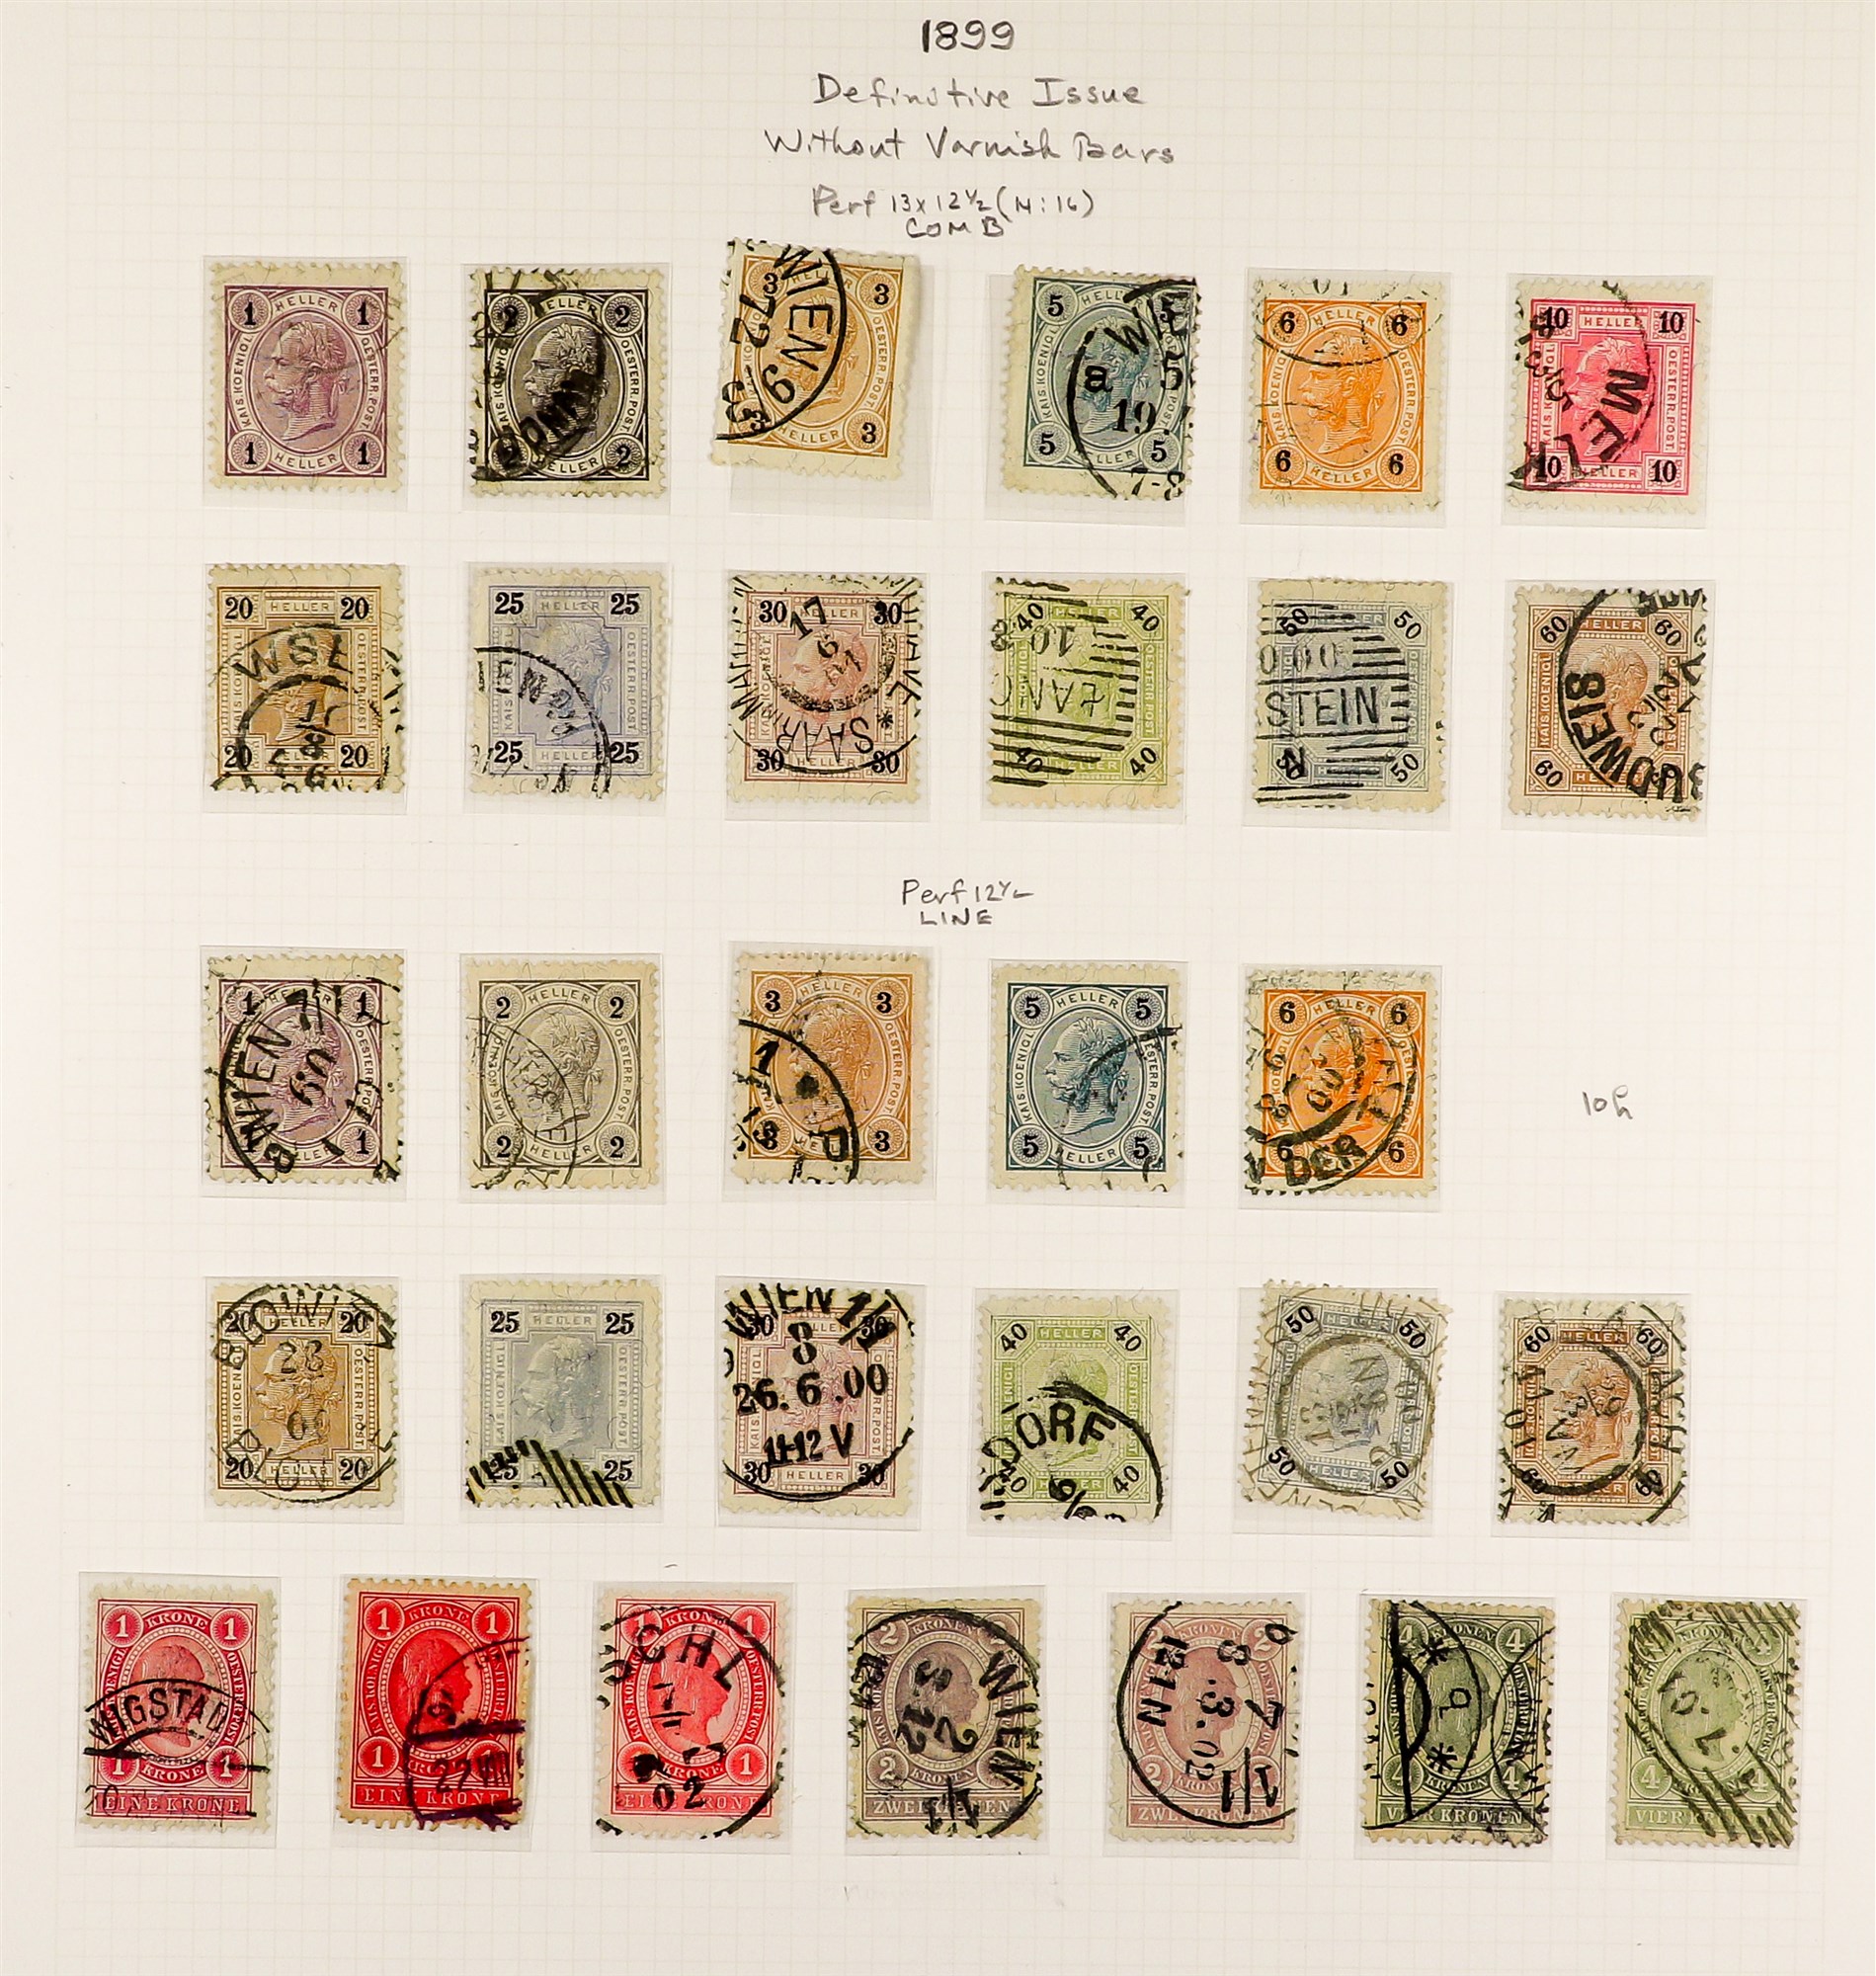 AUSTRIA 1890 - 1907 FRANZ JOSEF DEFINITIVES collection of over 300 stamps on album pages, semi- - Image 8 of 13